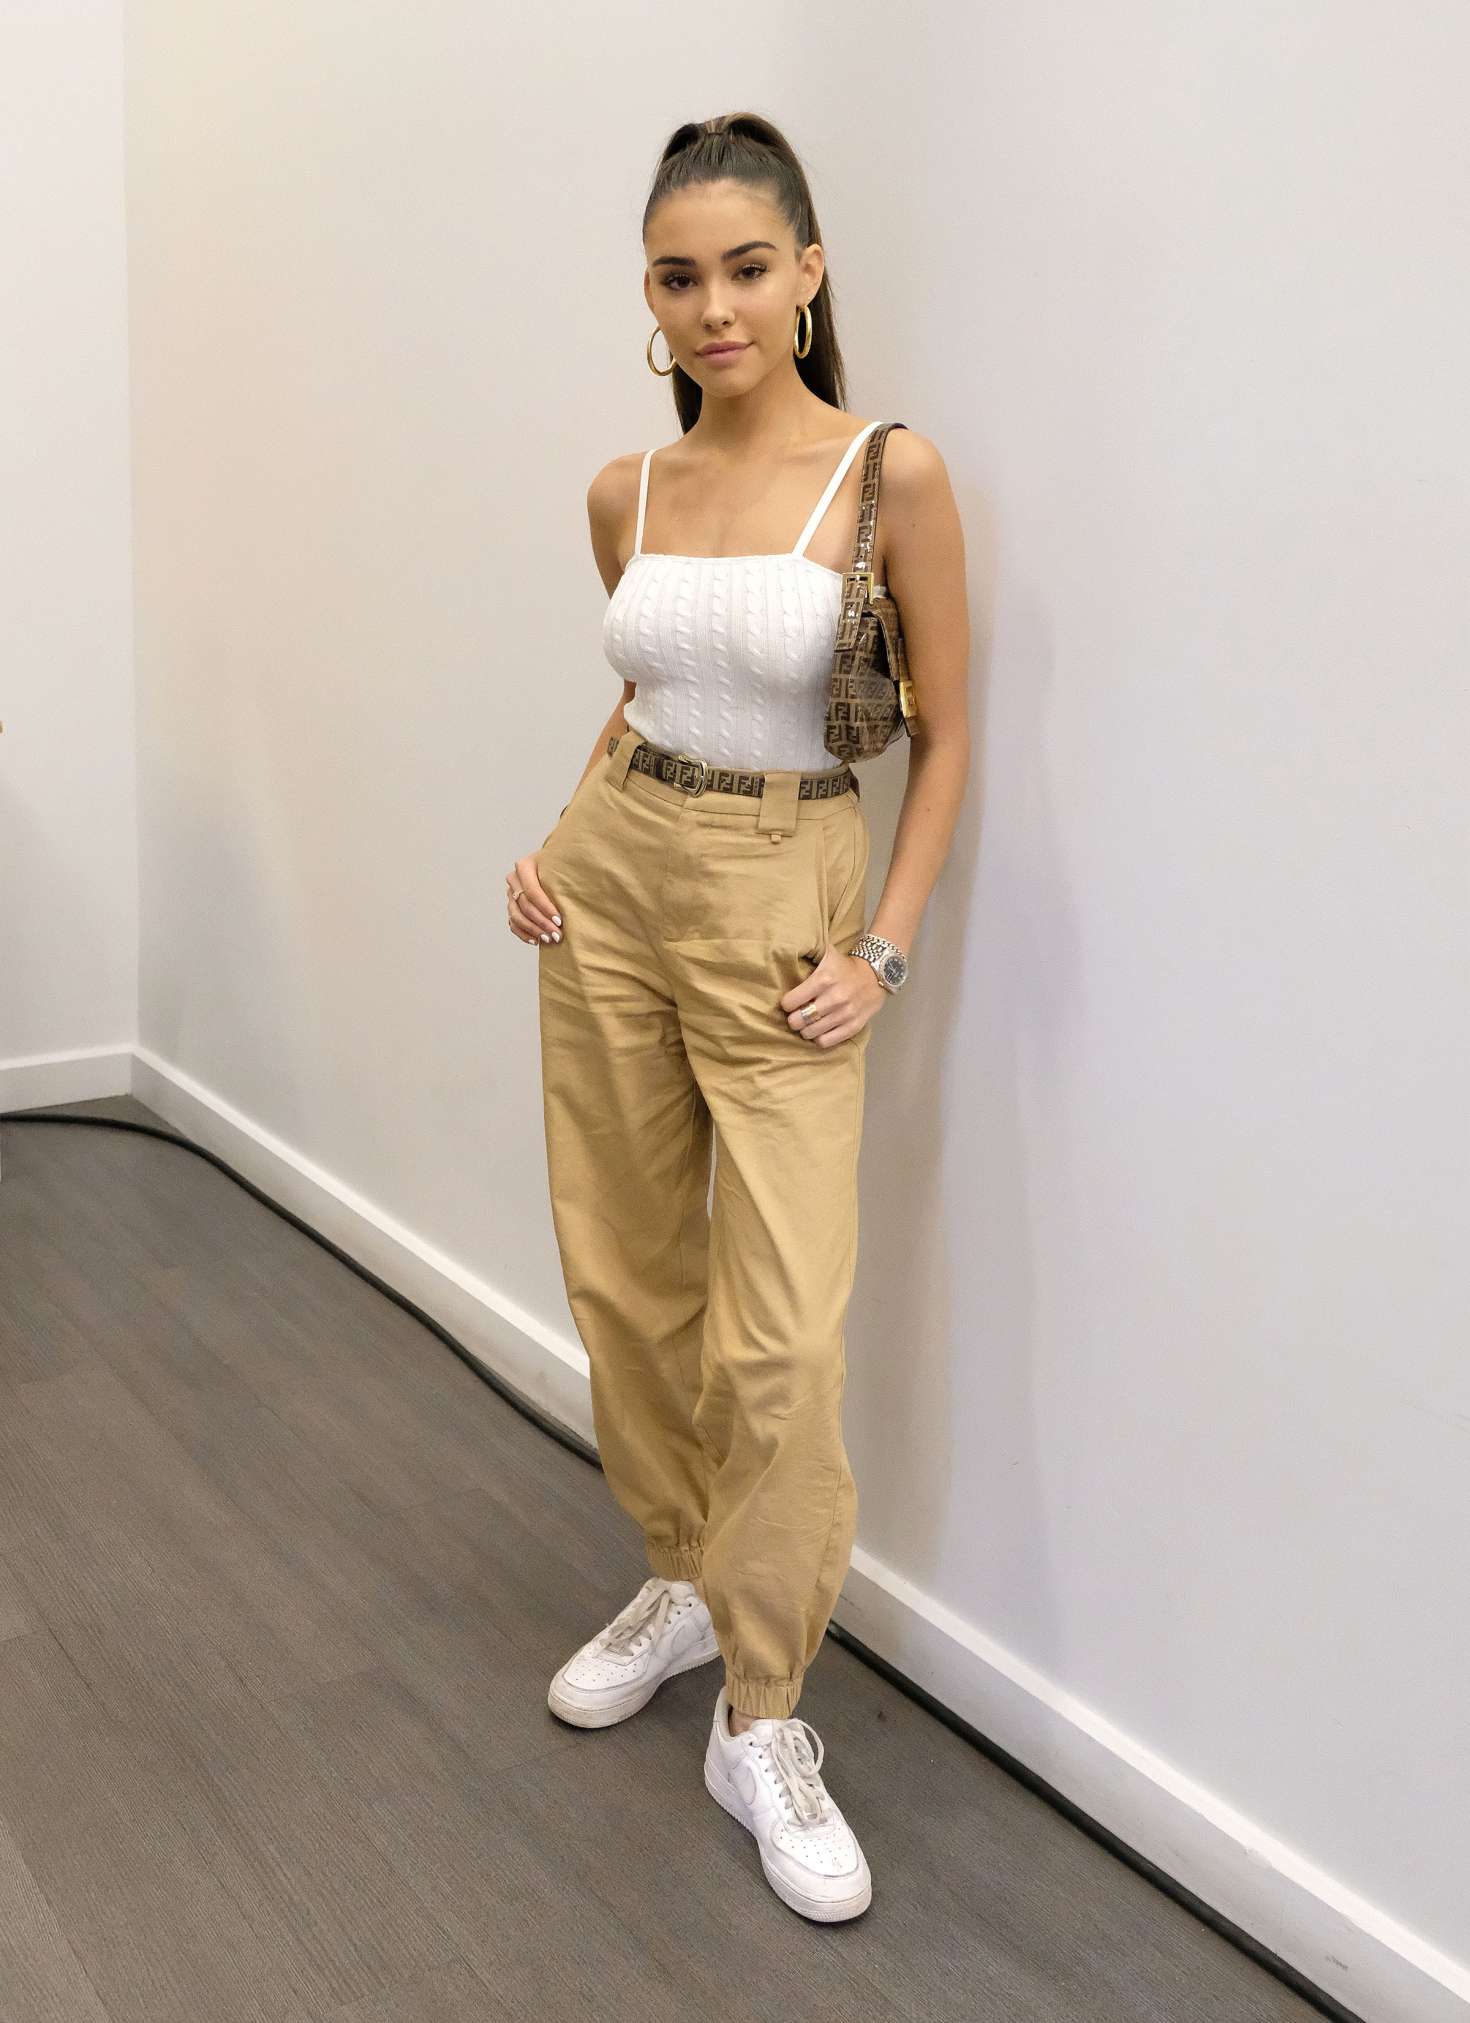 Madison Beer at Young Hollywood Promoting her new song â€˜Home with Youâ€™ in LA